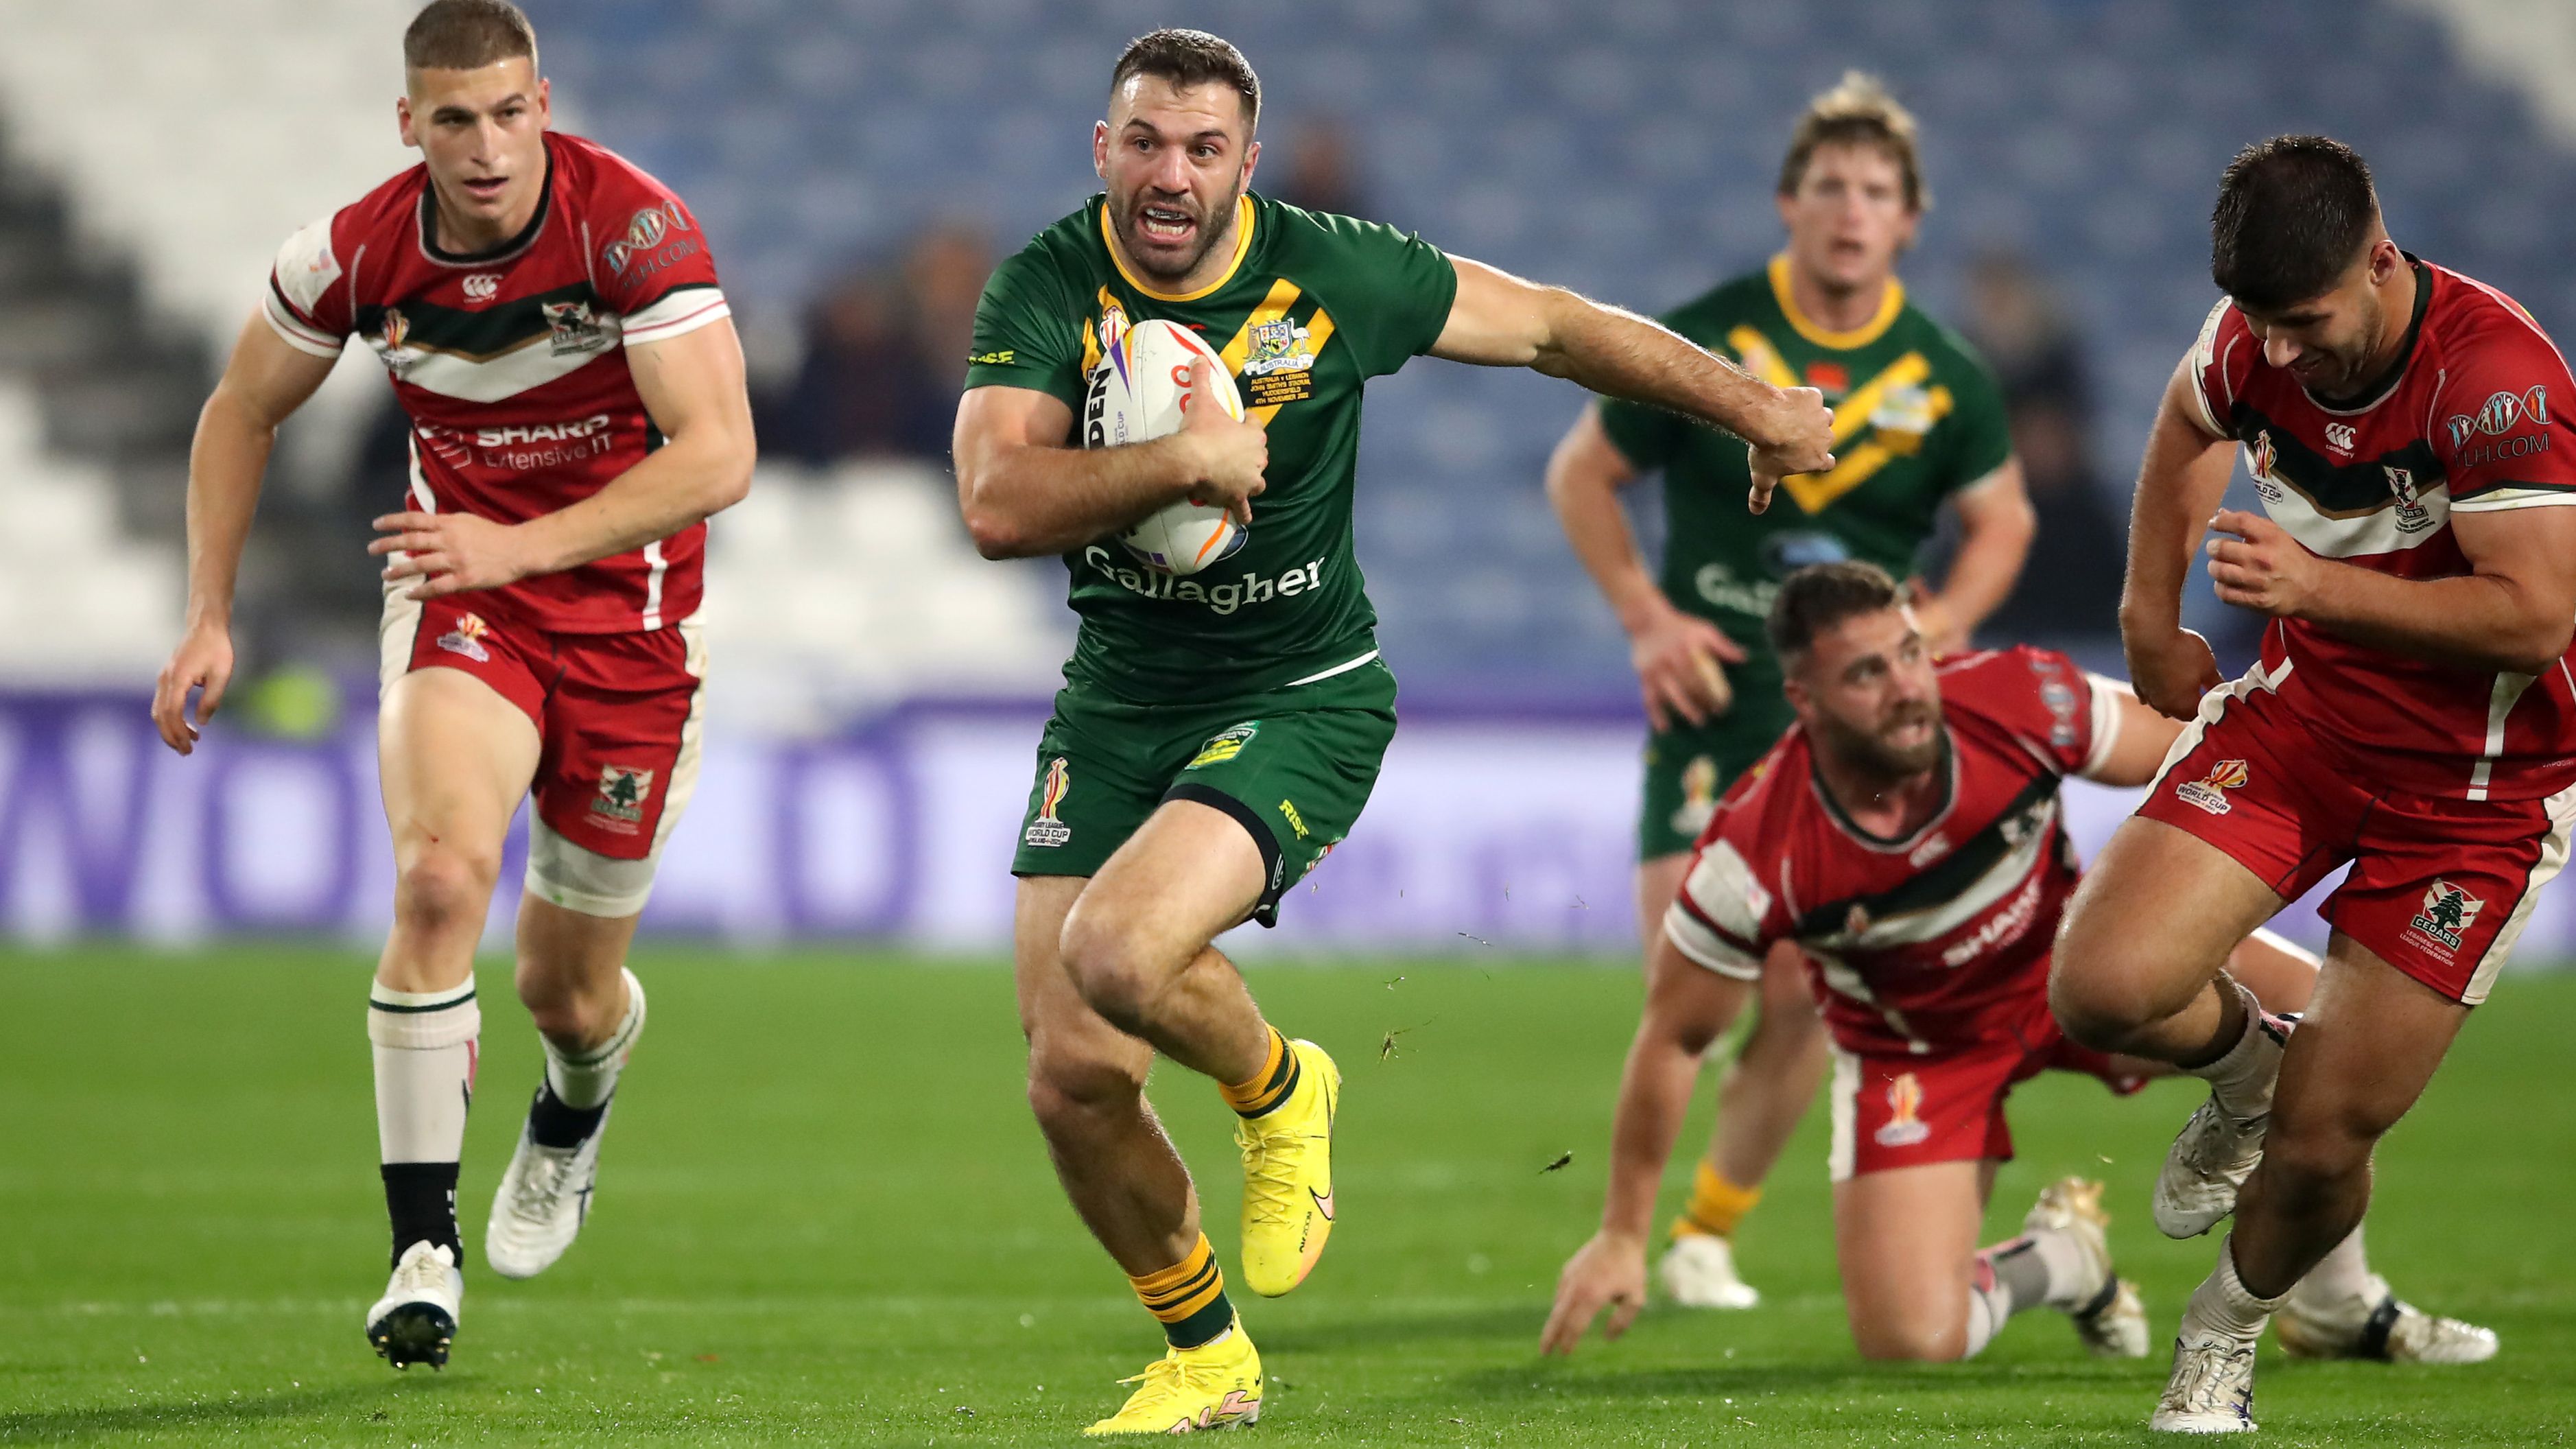 James Tedesco's charged Kangaroos statement ahead of semi-final clash with New Zealand